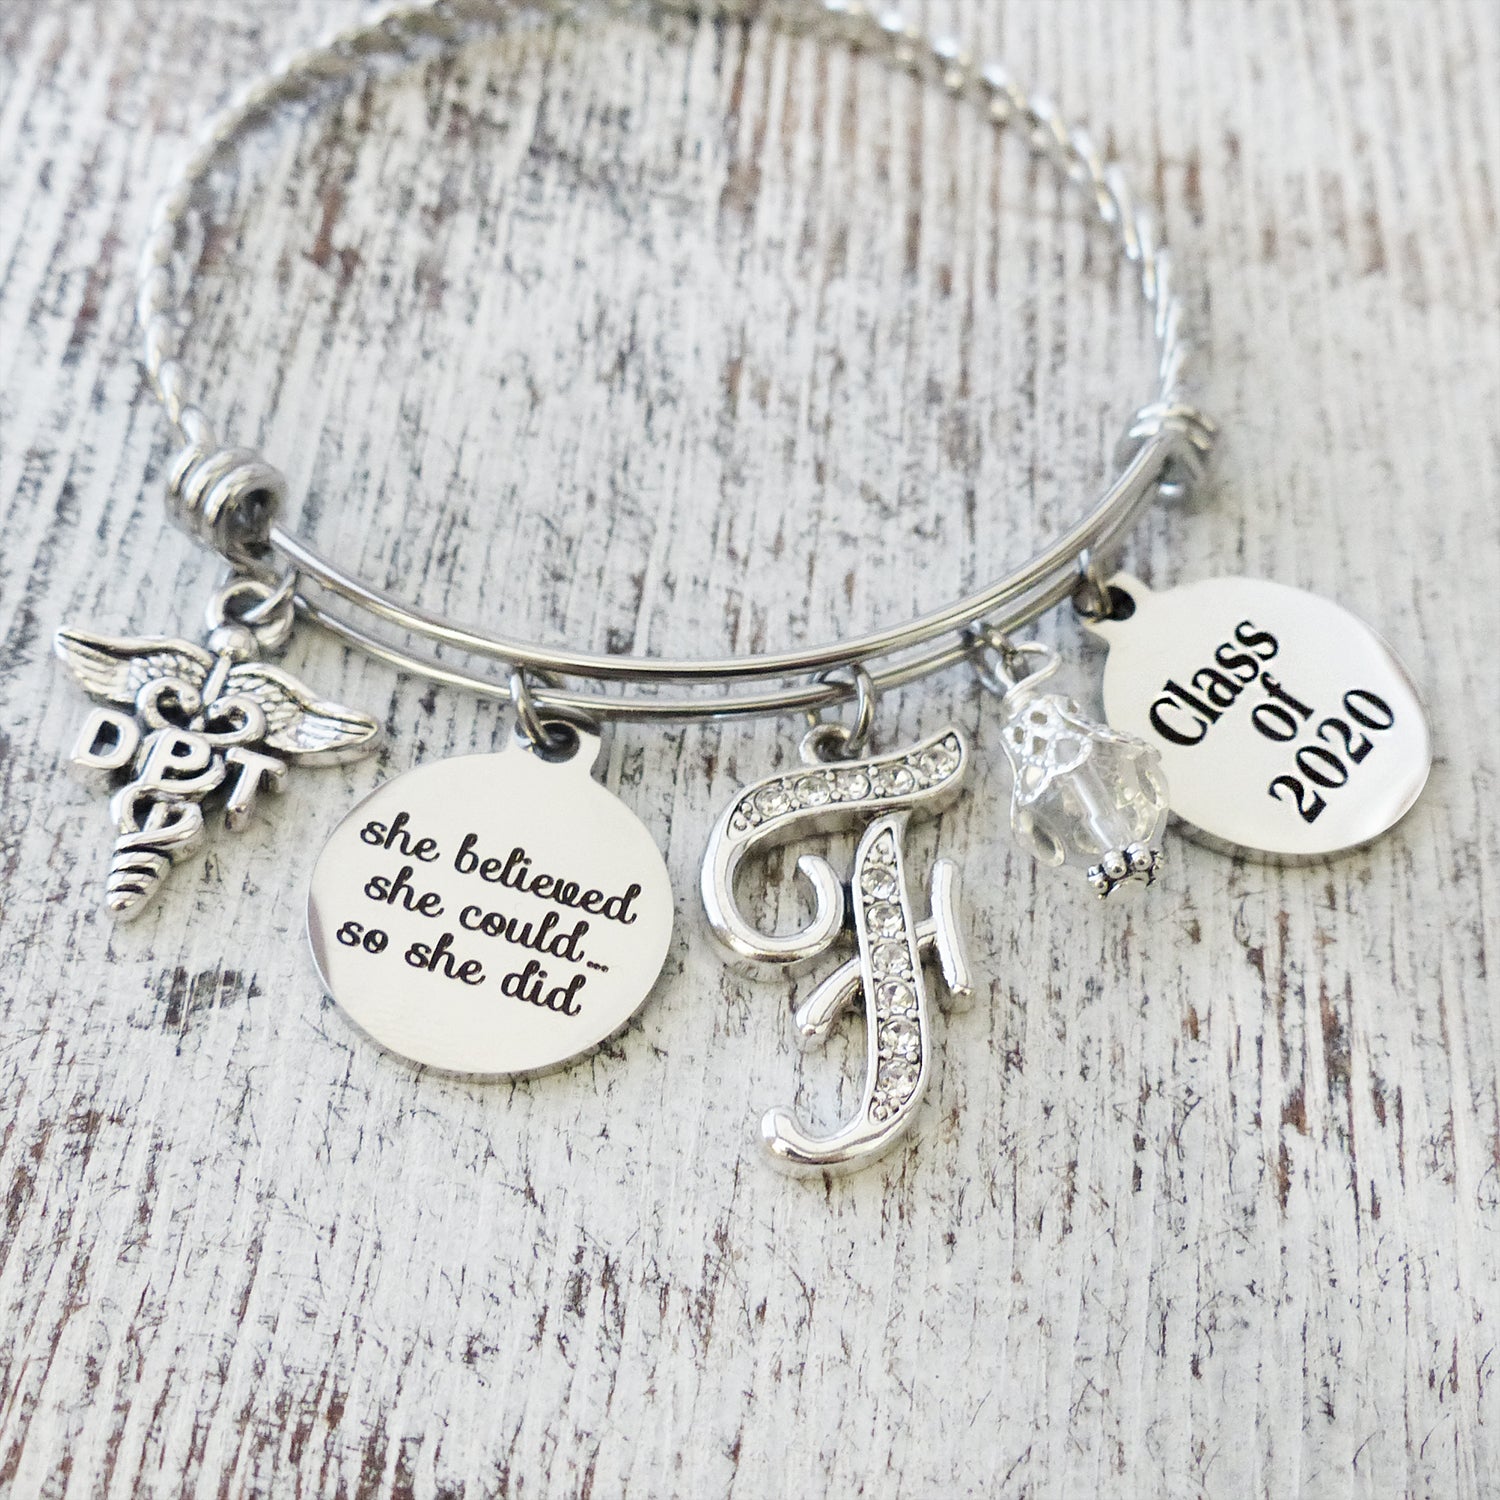 Class of 2024 DPT Graduation Gifts, Personalized She believed she could so she did jewelry gifts, Graduation Bracelet, College Grad Gift